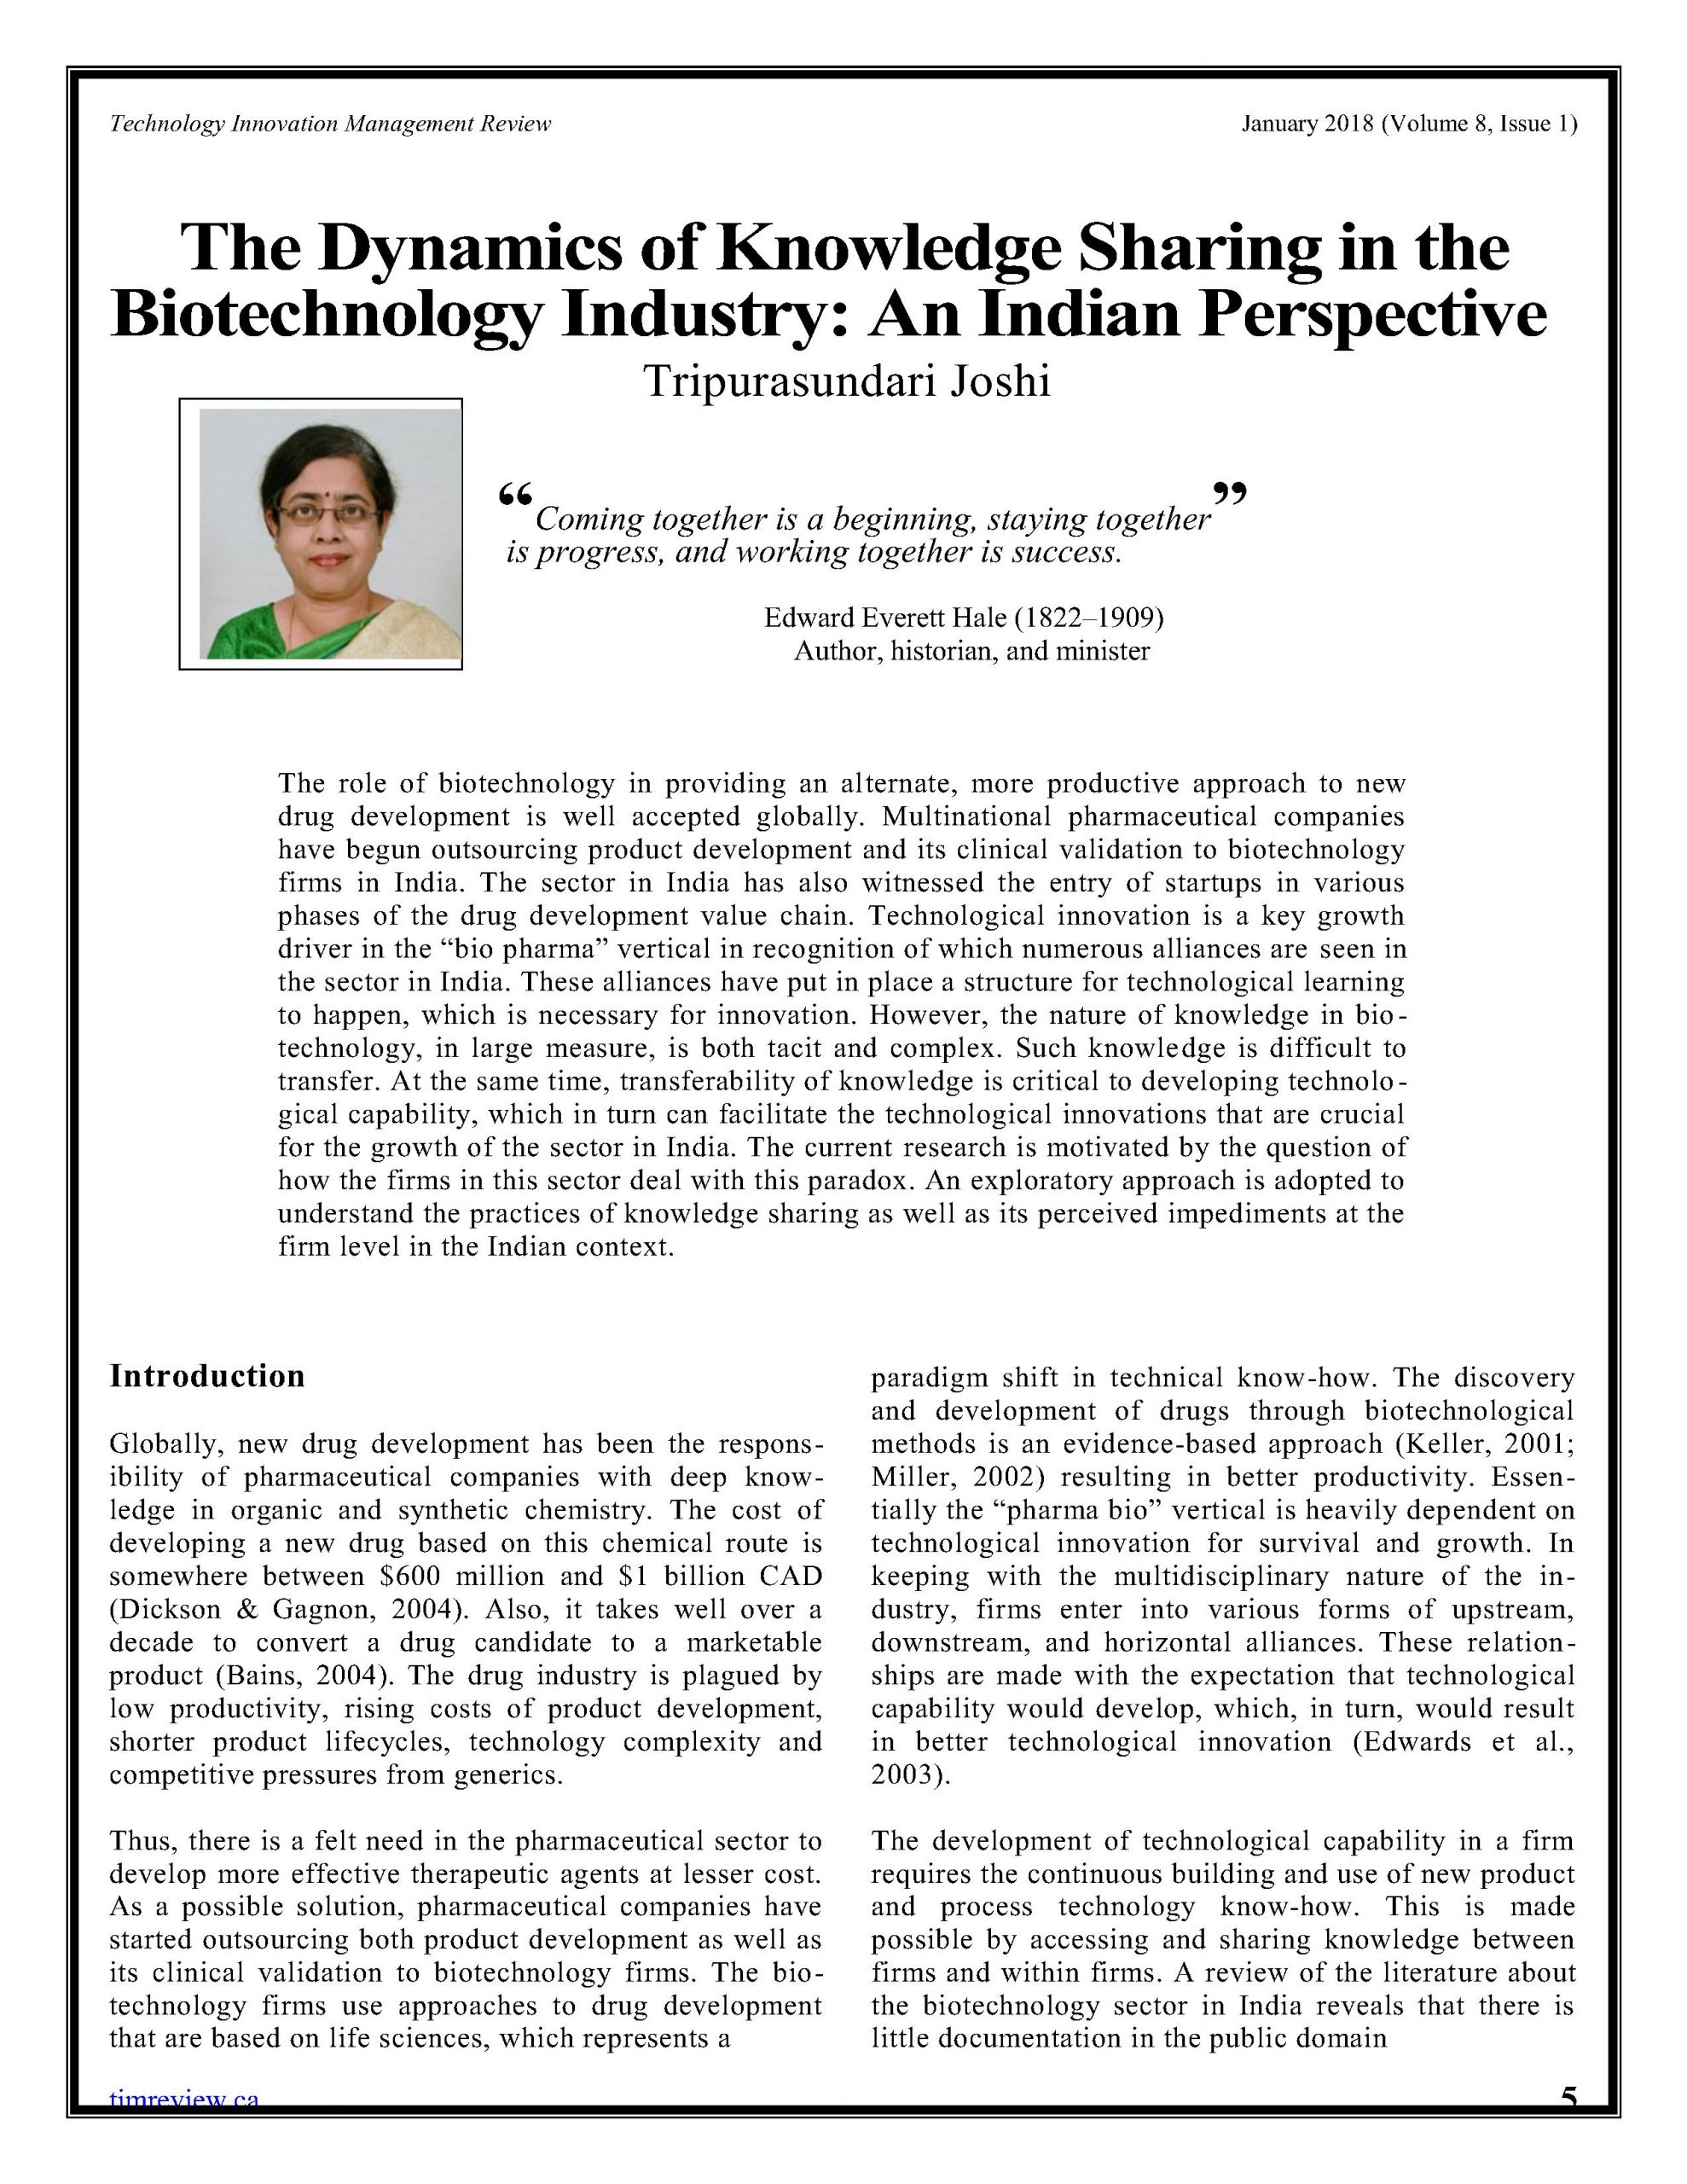 The Dynamics of Knowledge Sharing in the Biotechnology Industry: An Indian Perspective